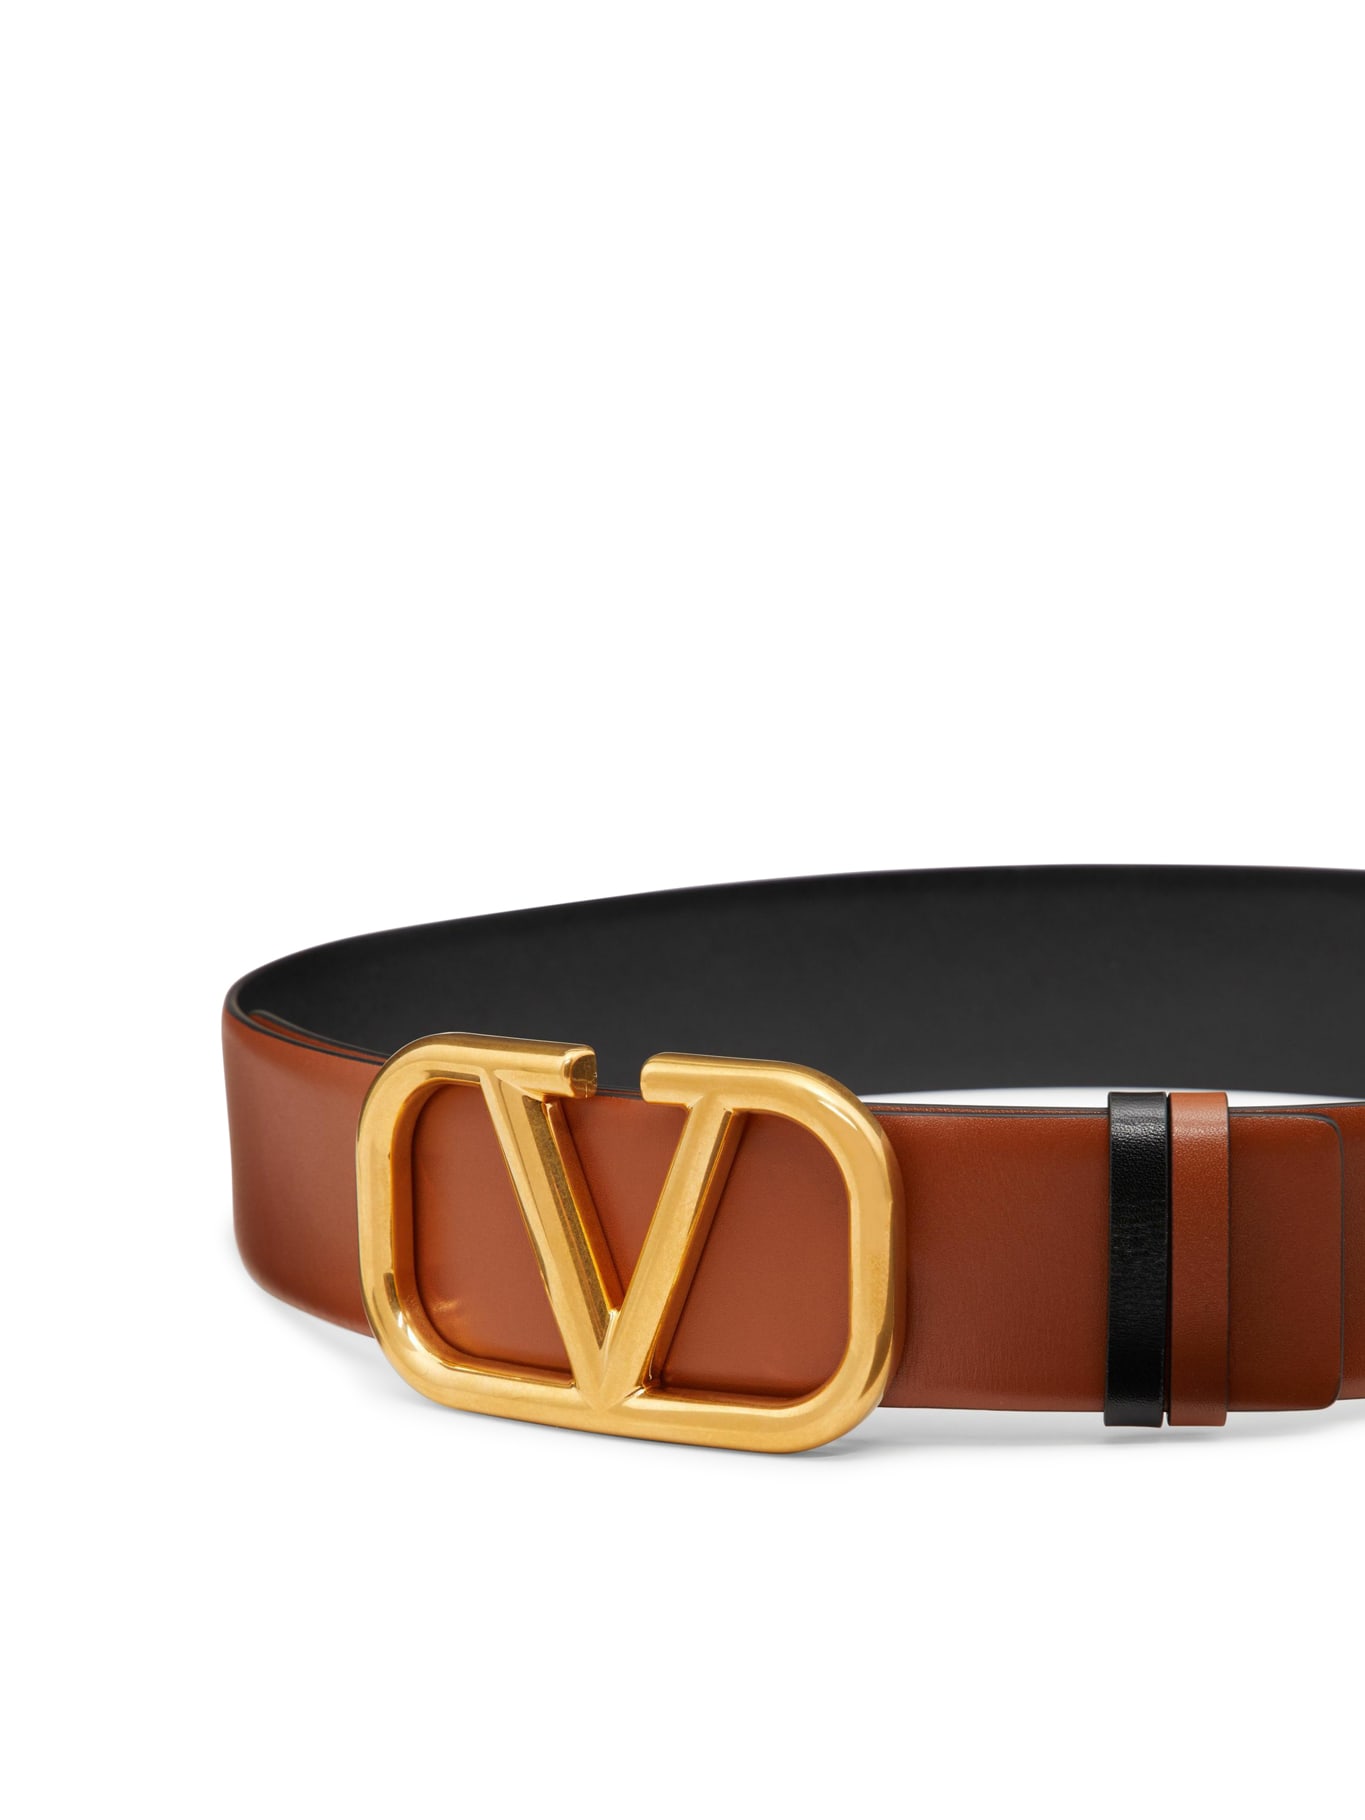 Vlogo Signature Belt In Glossy Calfskin 40mm for Woman in Black